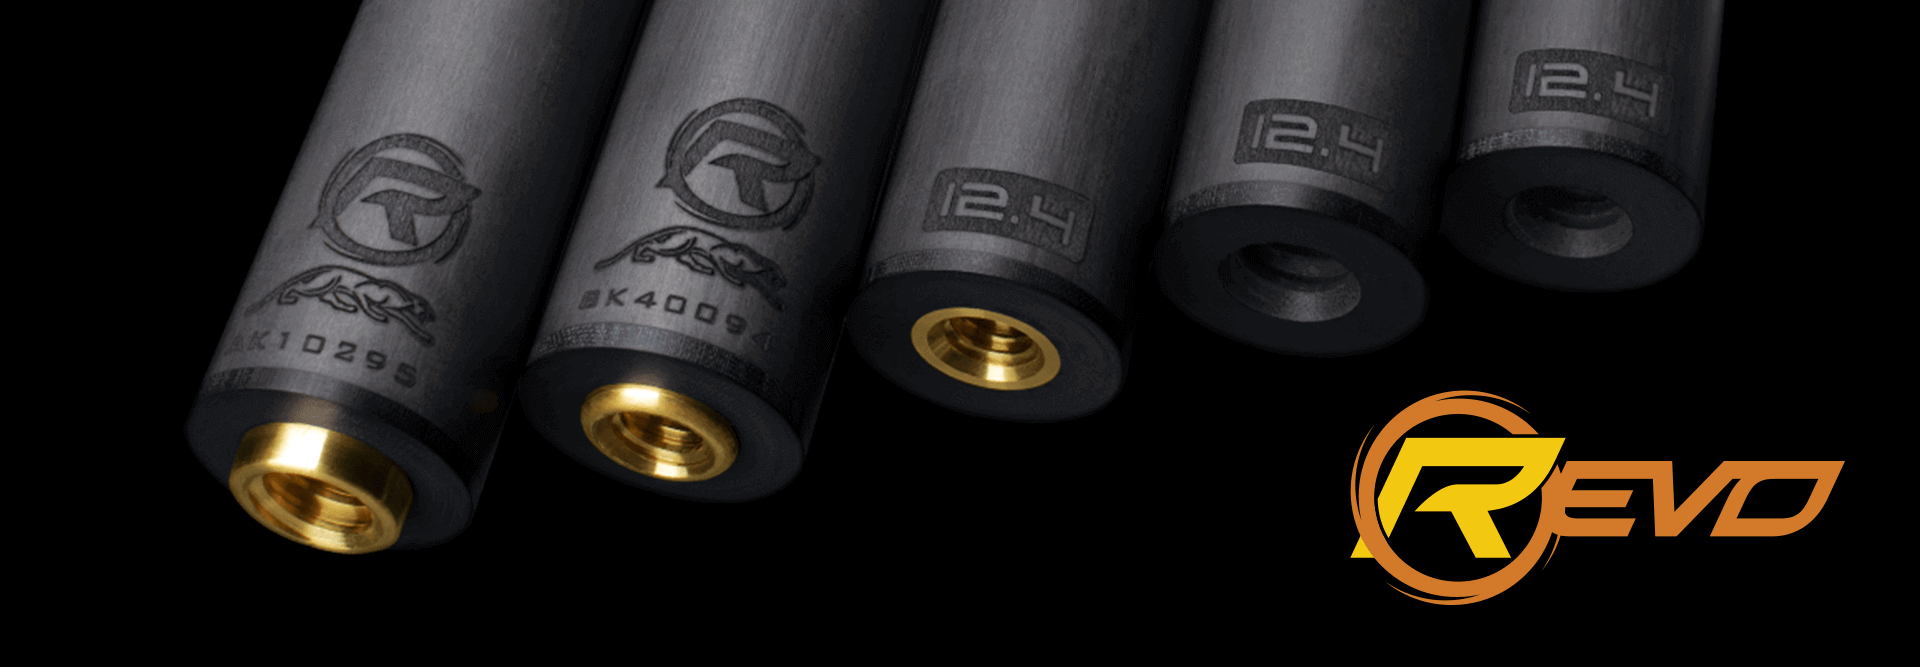 Predator REVO 12.4 Ultra Low Deflection Pool Cue Shafts | Official 